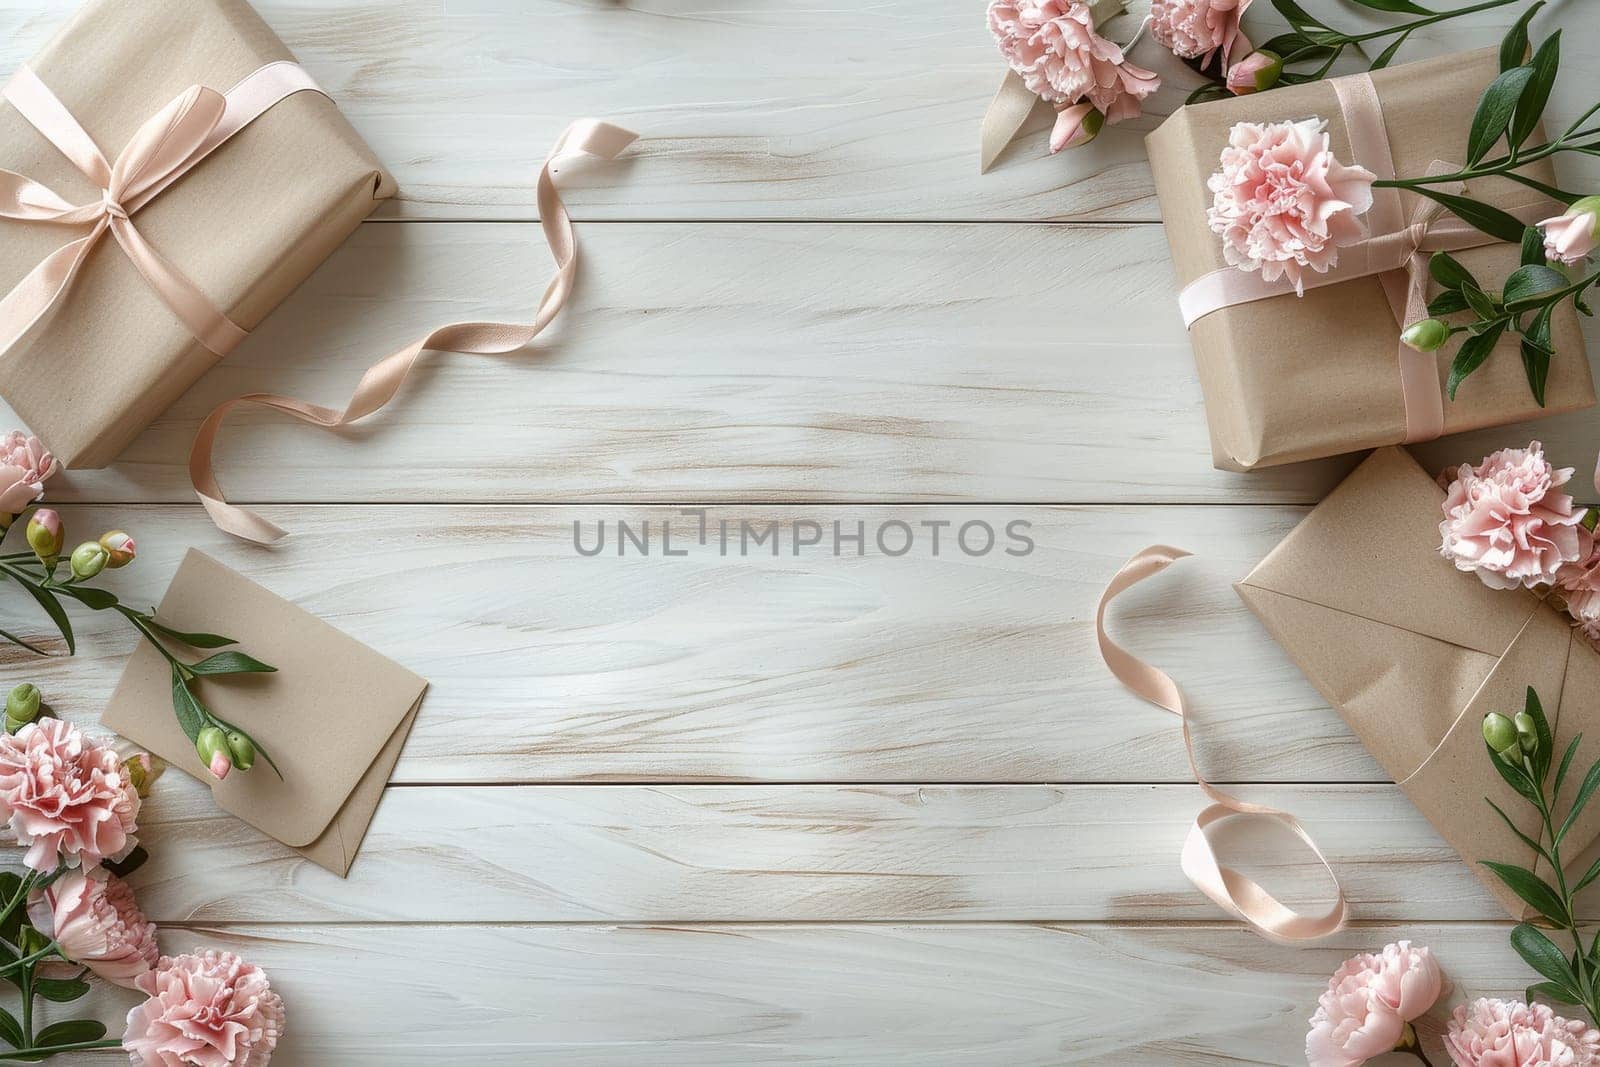 A white background with pink flowers and brown boxes. The boxes are wrapped in pink ribbon and are placed on the table